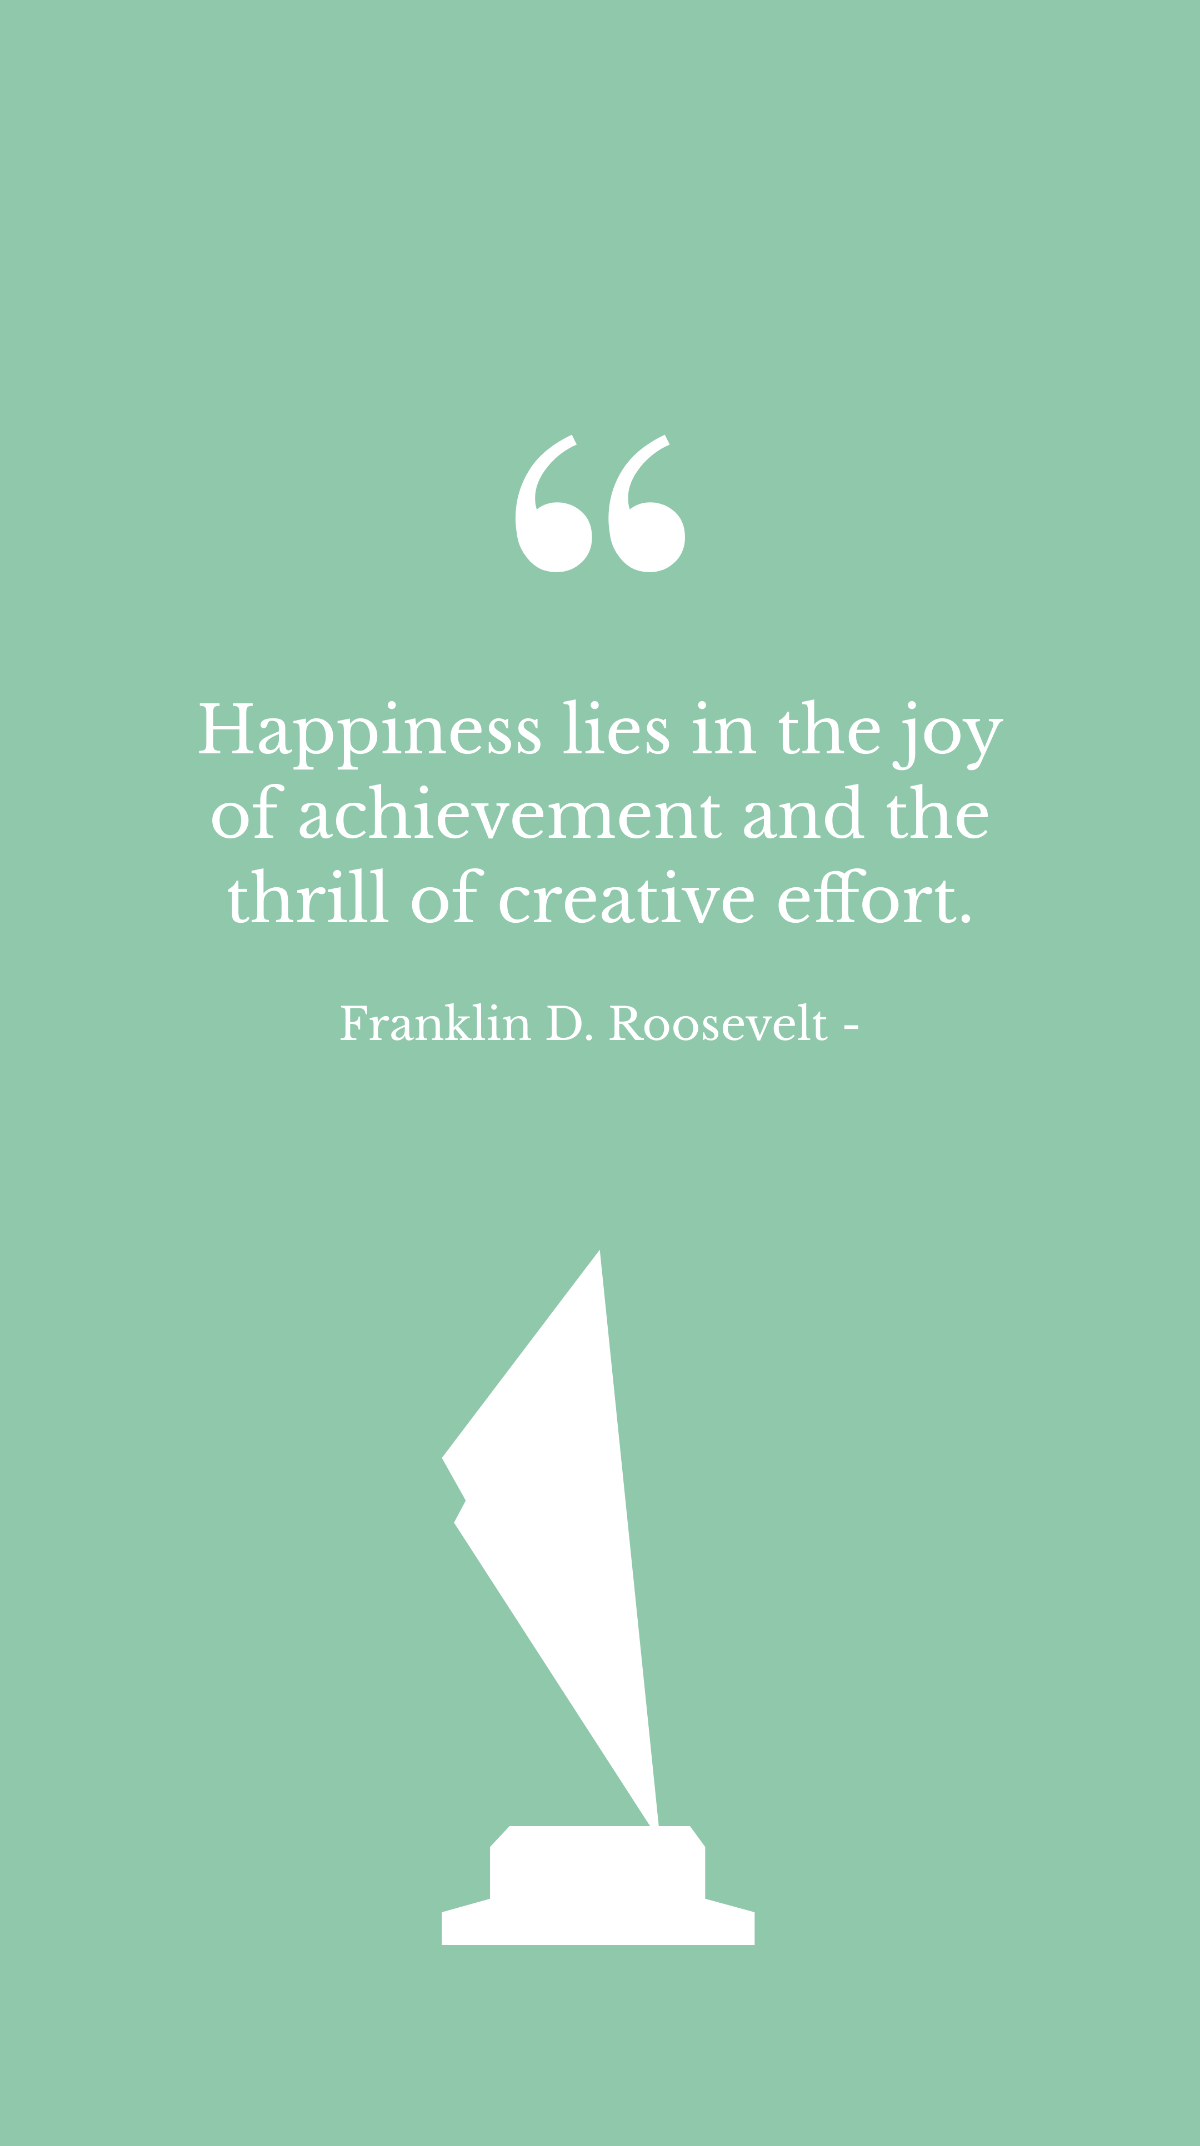 Franklin D. Roosevelt - Happiness lies in the joy of achievement and the thrill of creative effort. Template